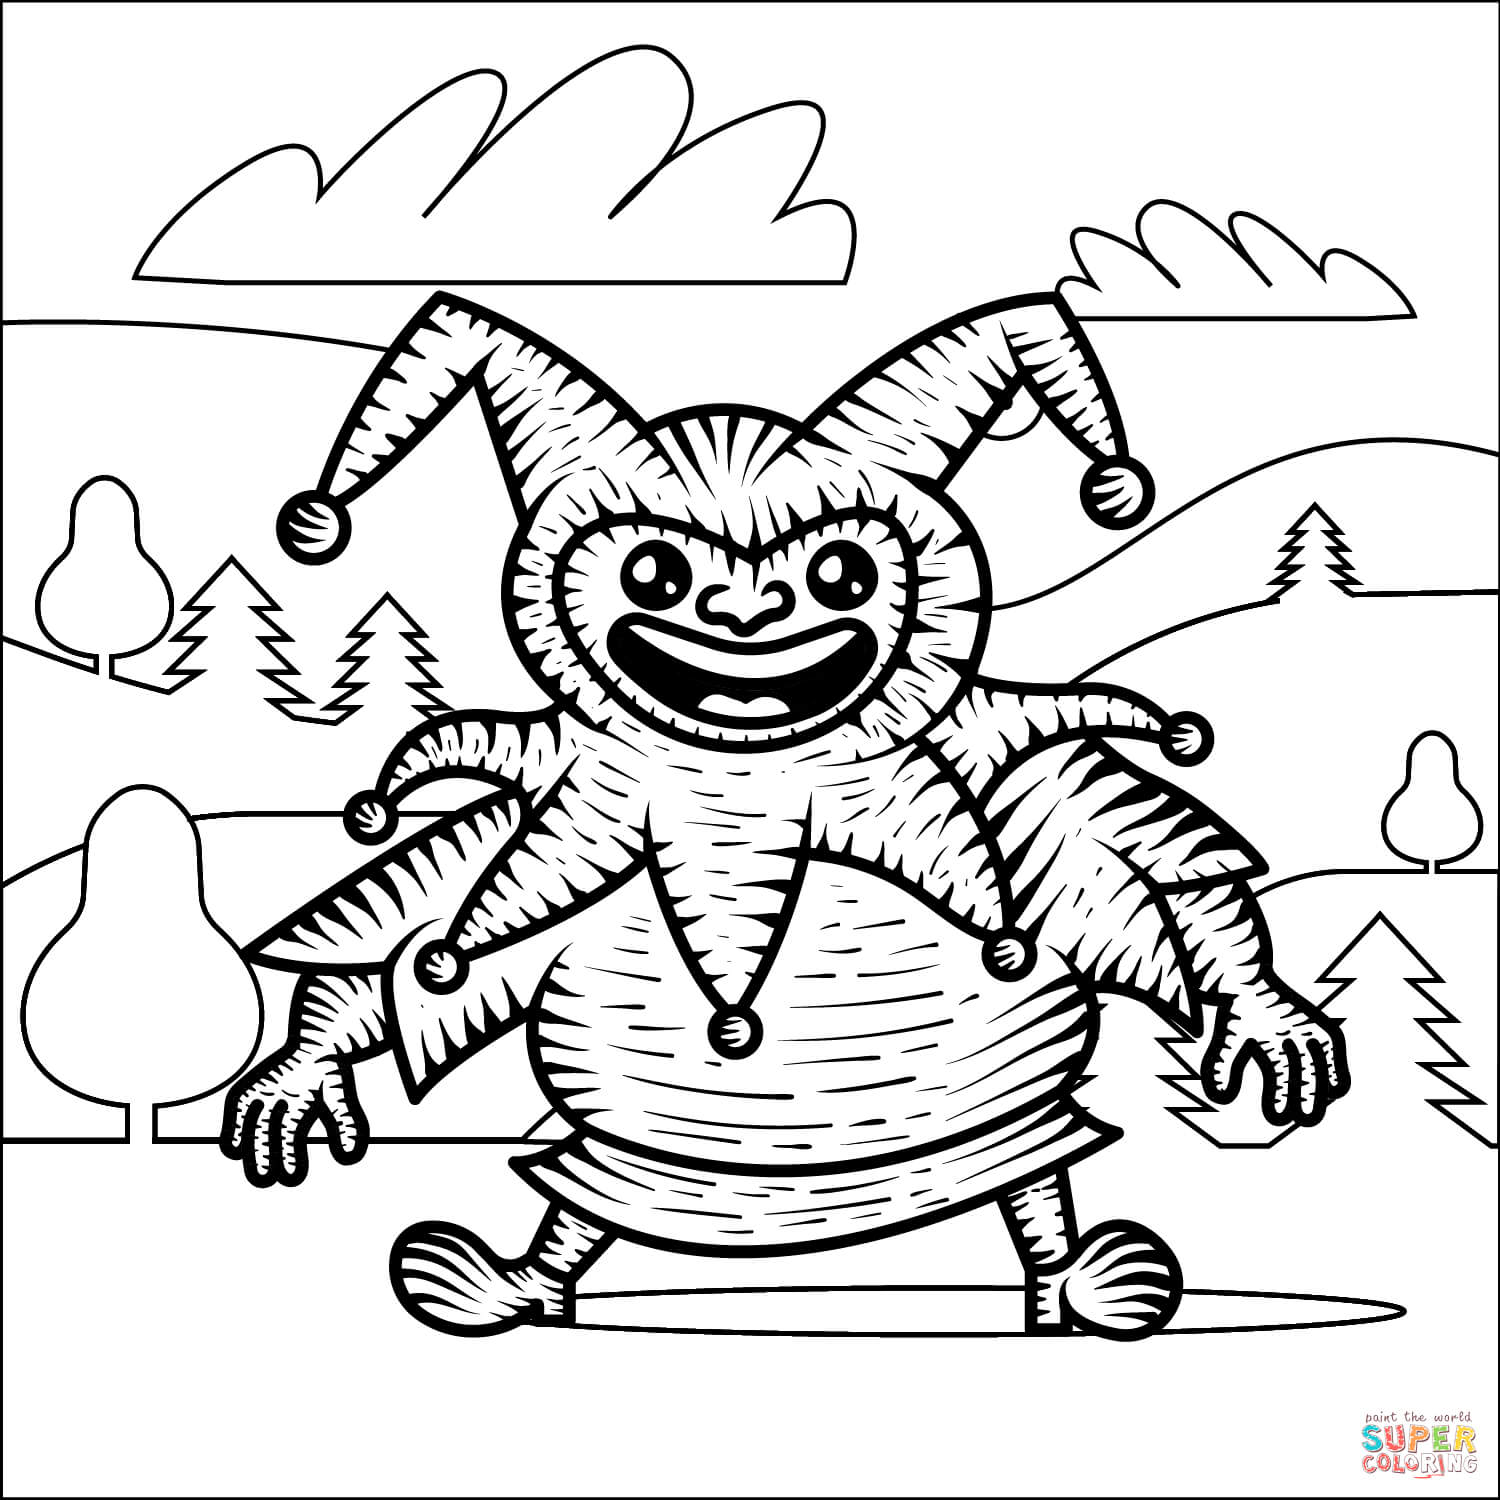 Jester coloring page free printable coloring pages